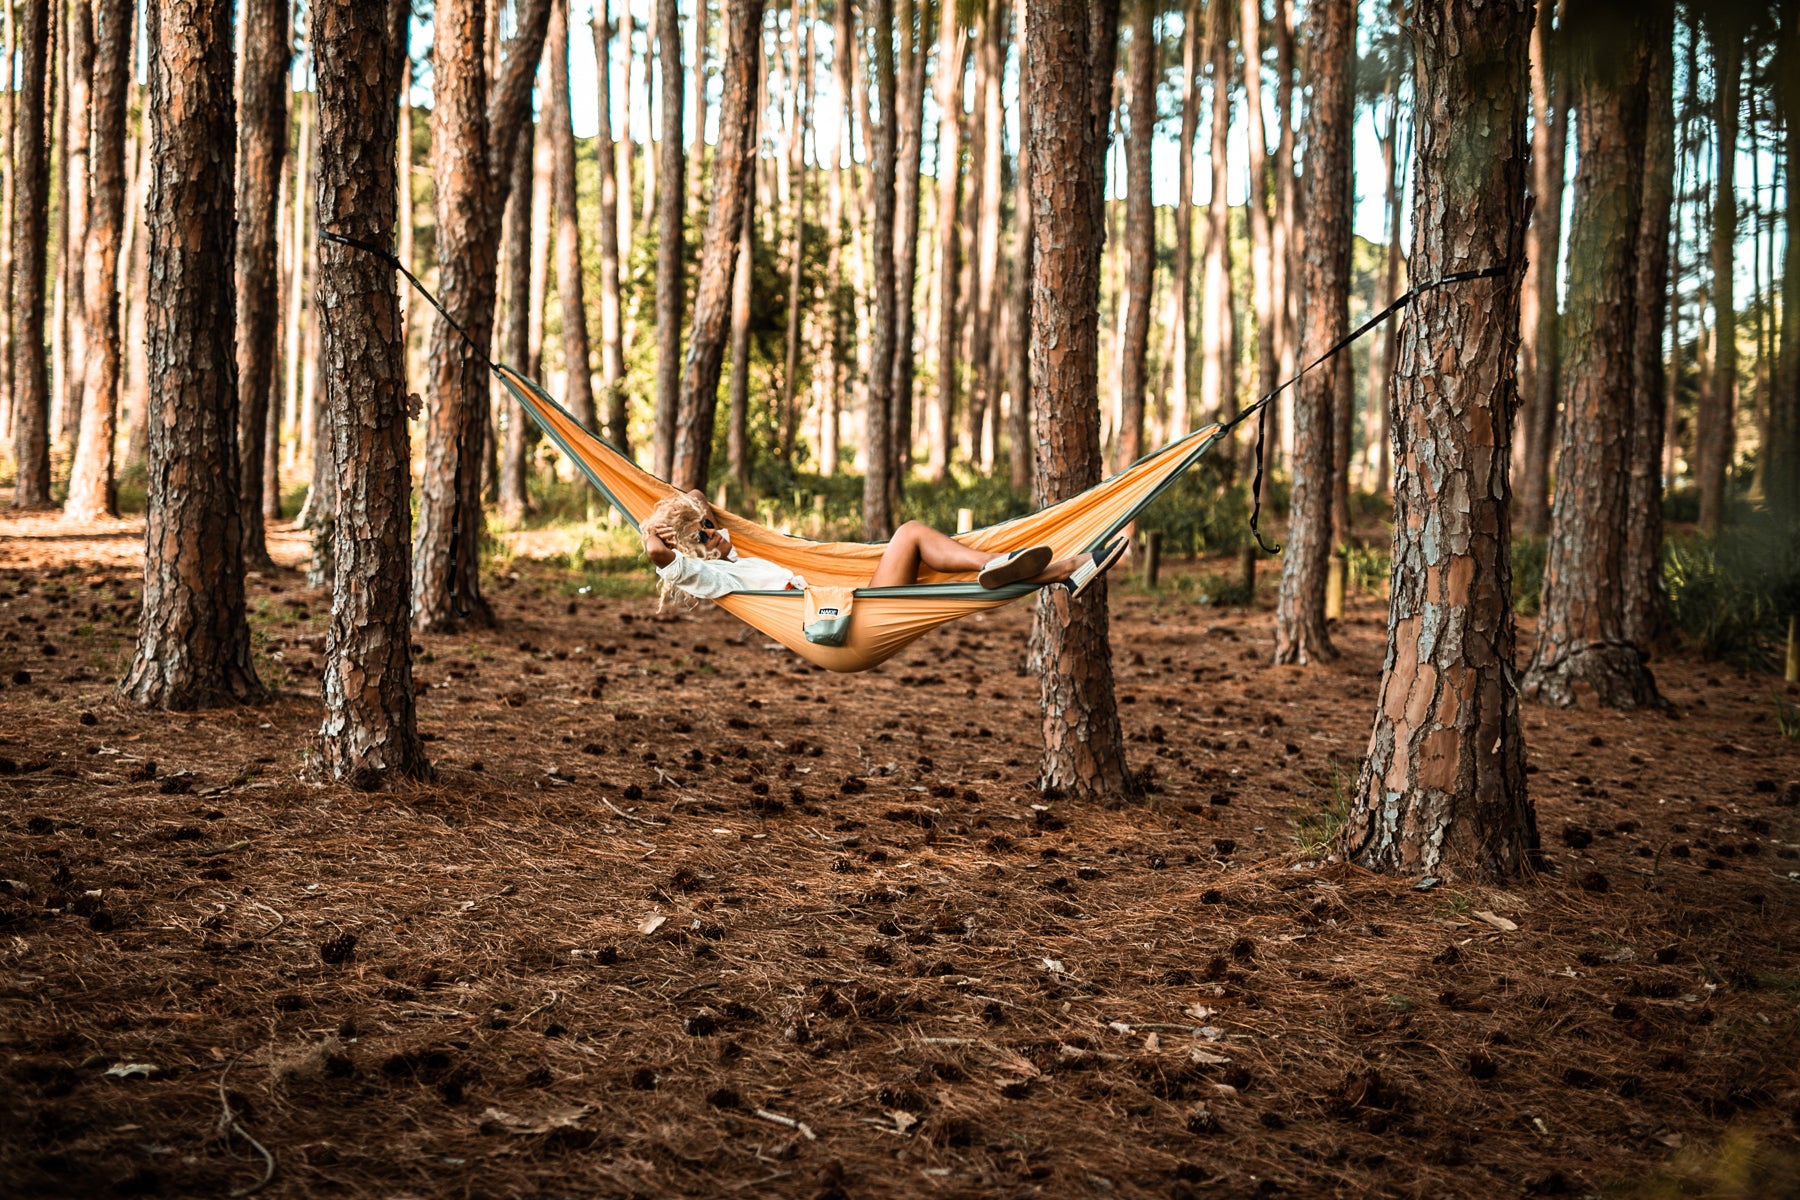 How to Hang Your Nakie Hammock!